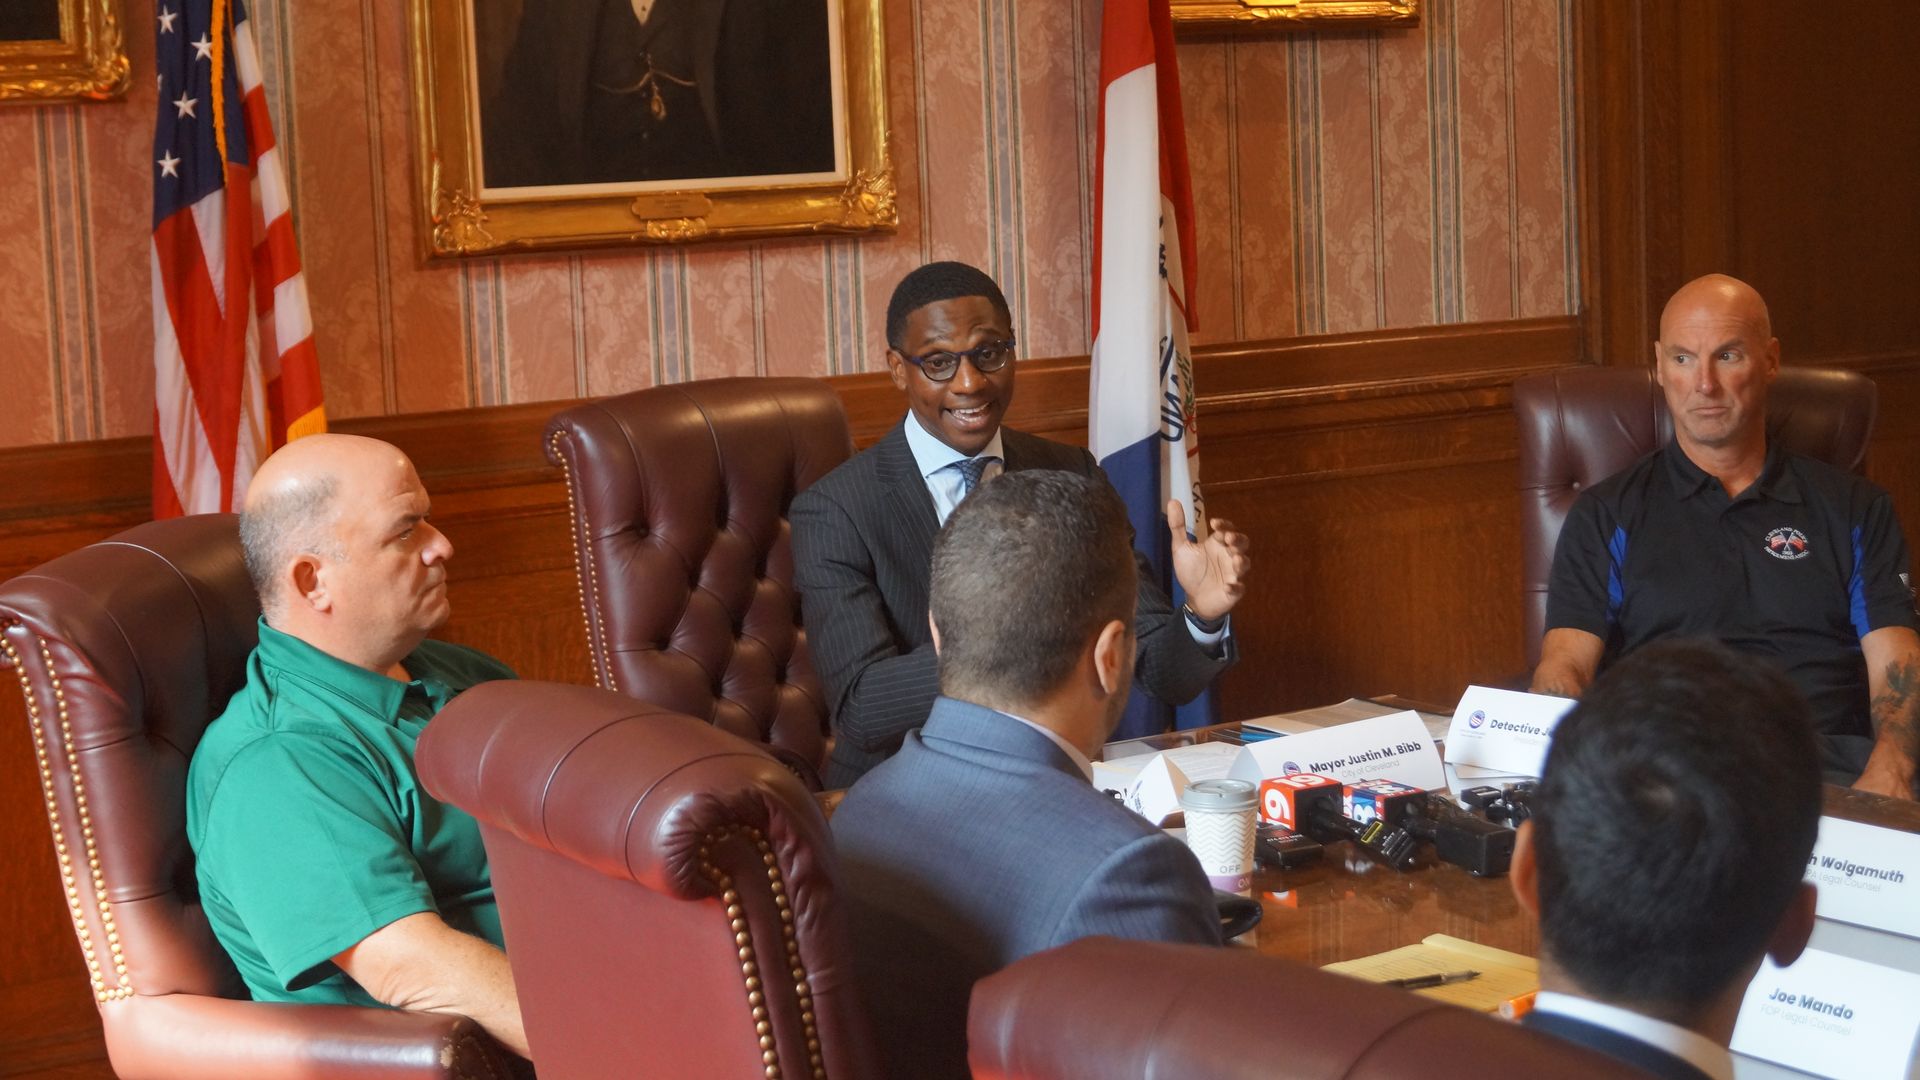 Mayor Justin Bibb at the head of the conference table in the Mayor's Red Room, flanked by police union leadership